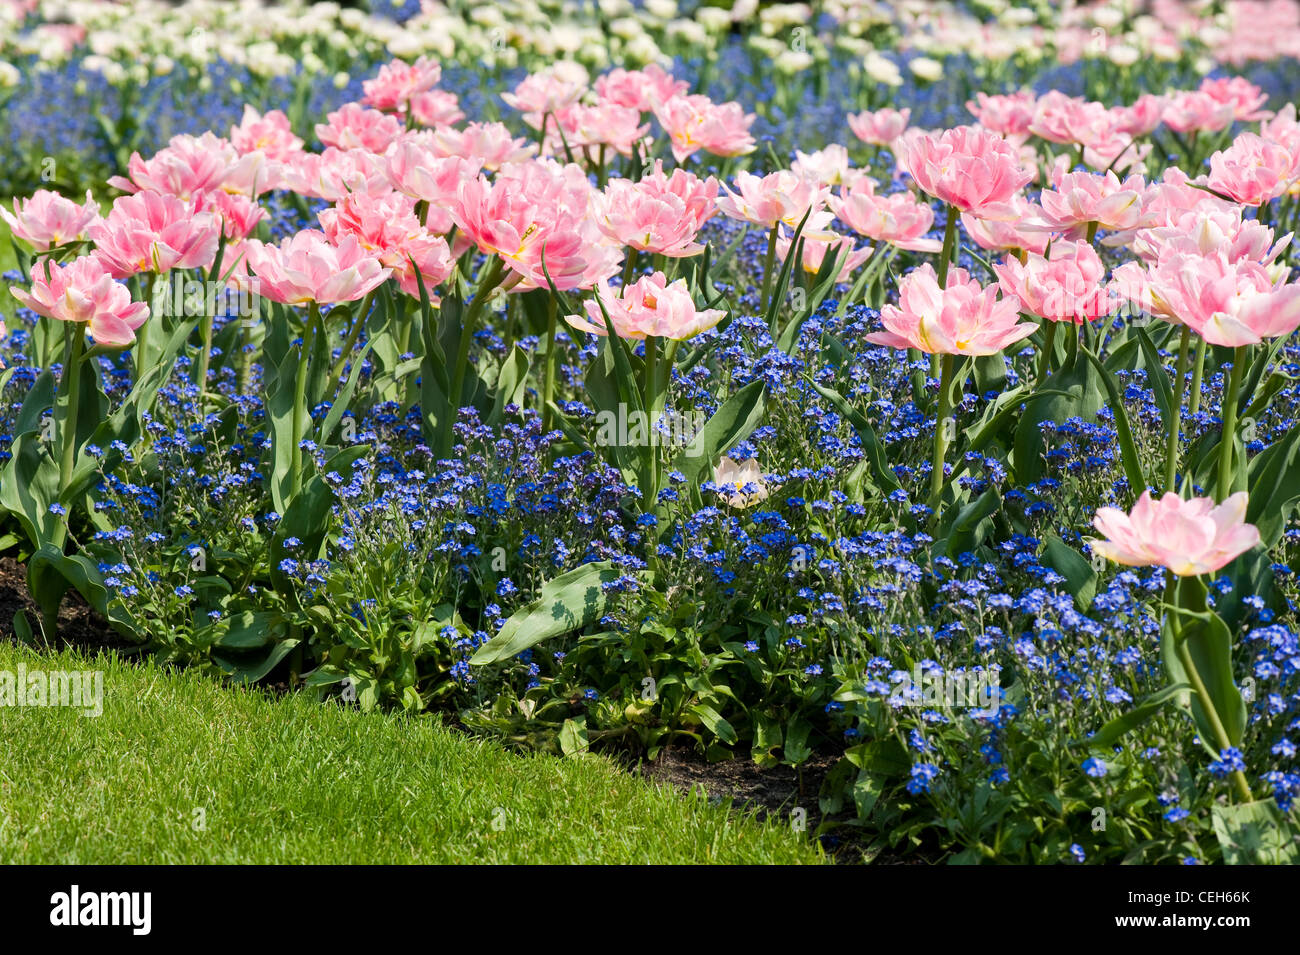 Myosotis called forget-me-not and Foxtrot tulips Stock Photo